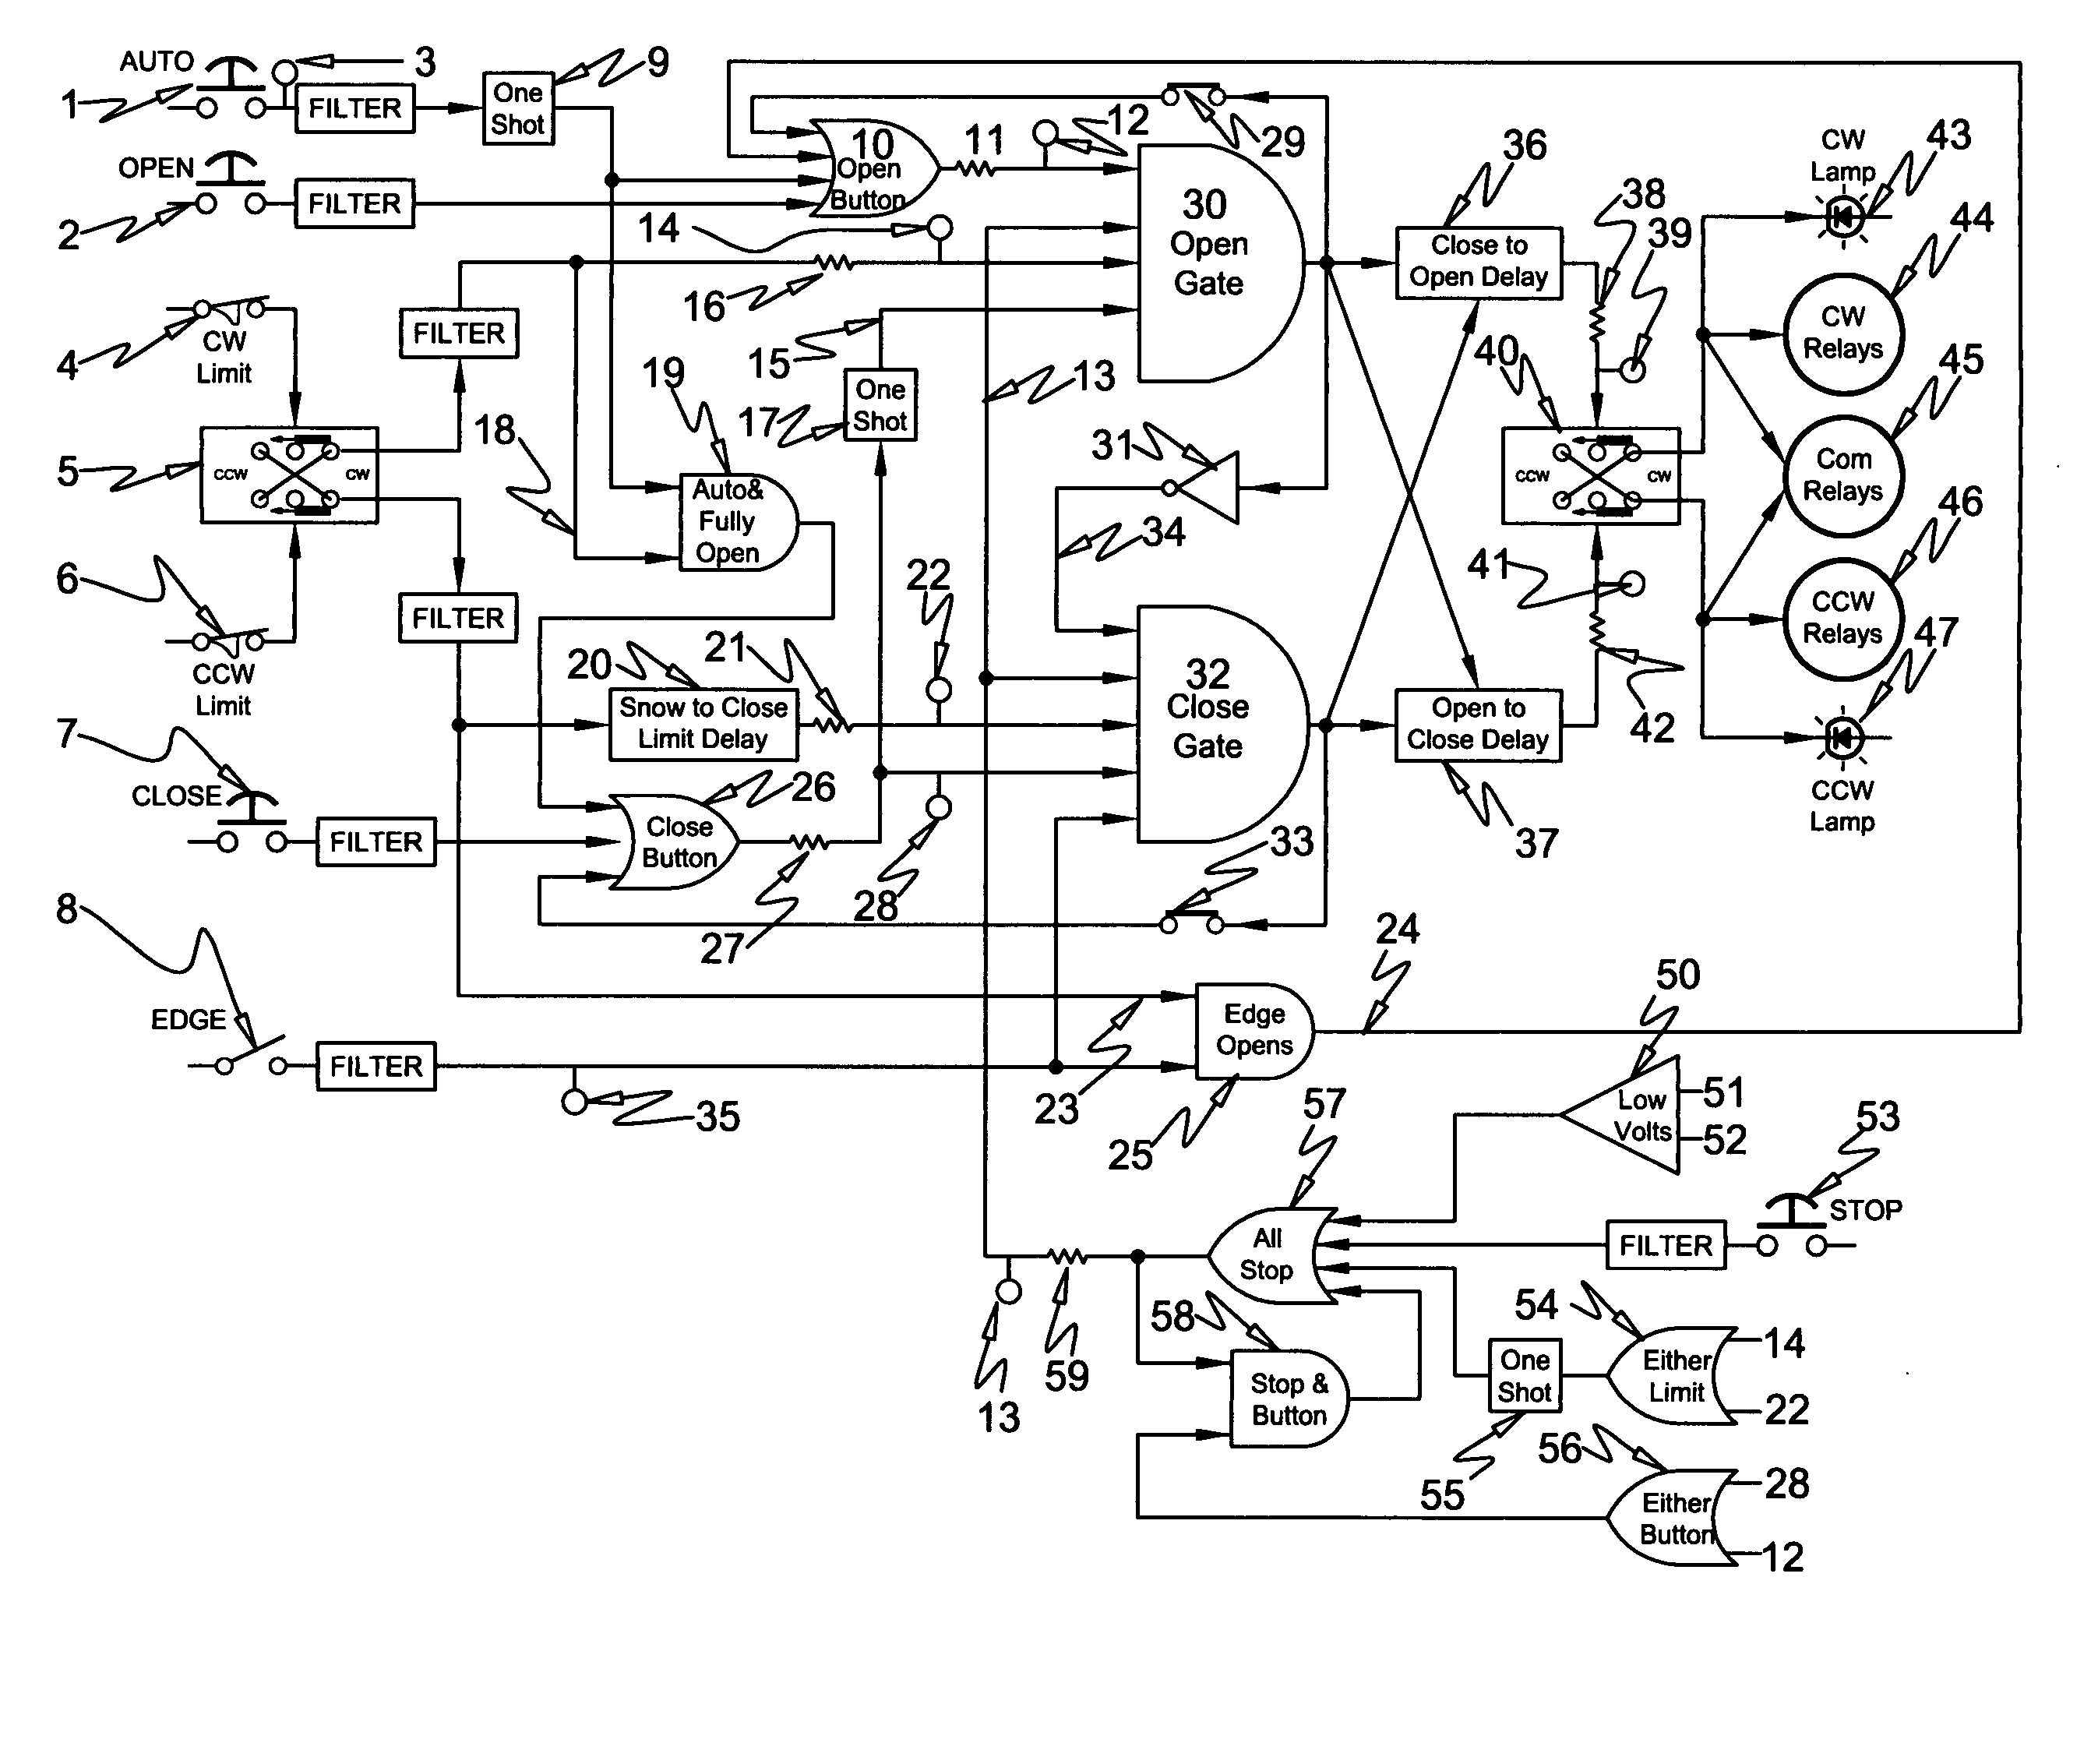 Electronic industrial motor operator control system